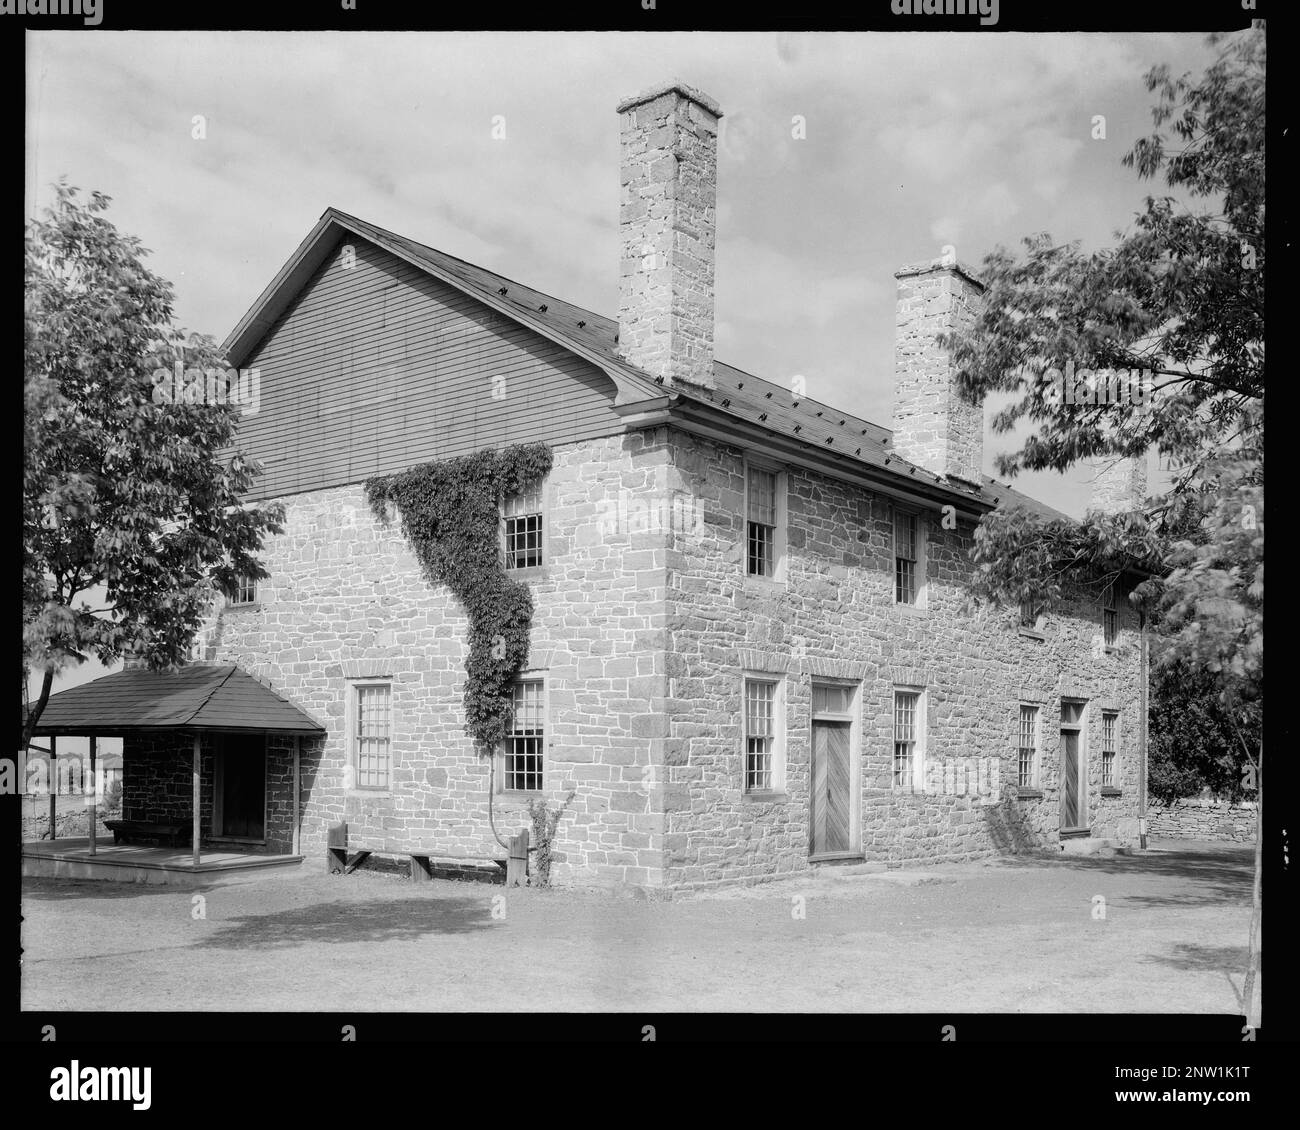 Quaker Meeting House, Winchester vic., Frederick County, Virginia. Carnegie Survey of the Architecture of the South. United States  Virginia  Frederick County  Winchester vic, Porches, Gables, Chimneys, Friends' meeting houses, Stone buildings. Stock Photo